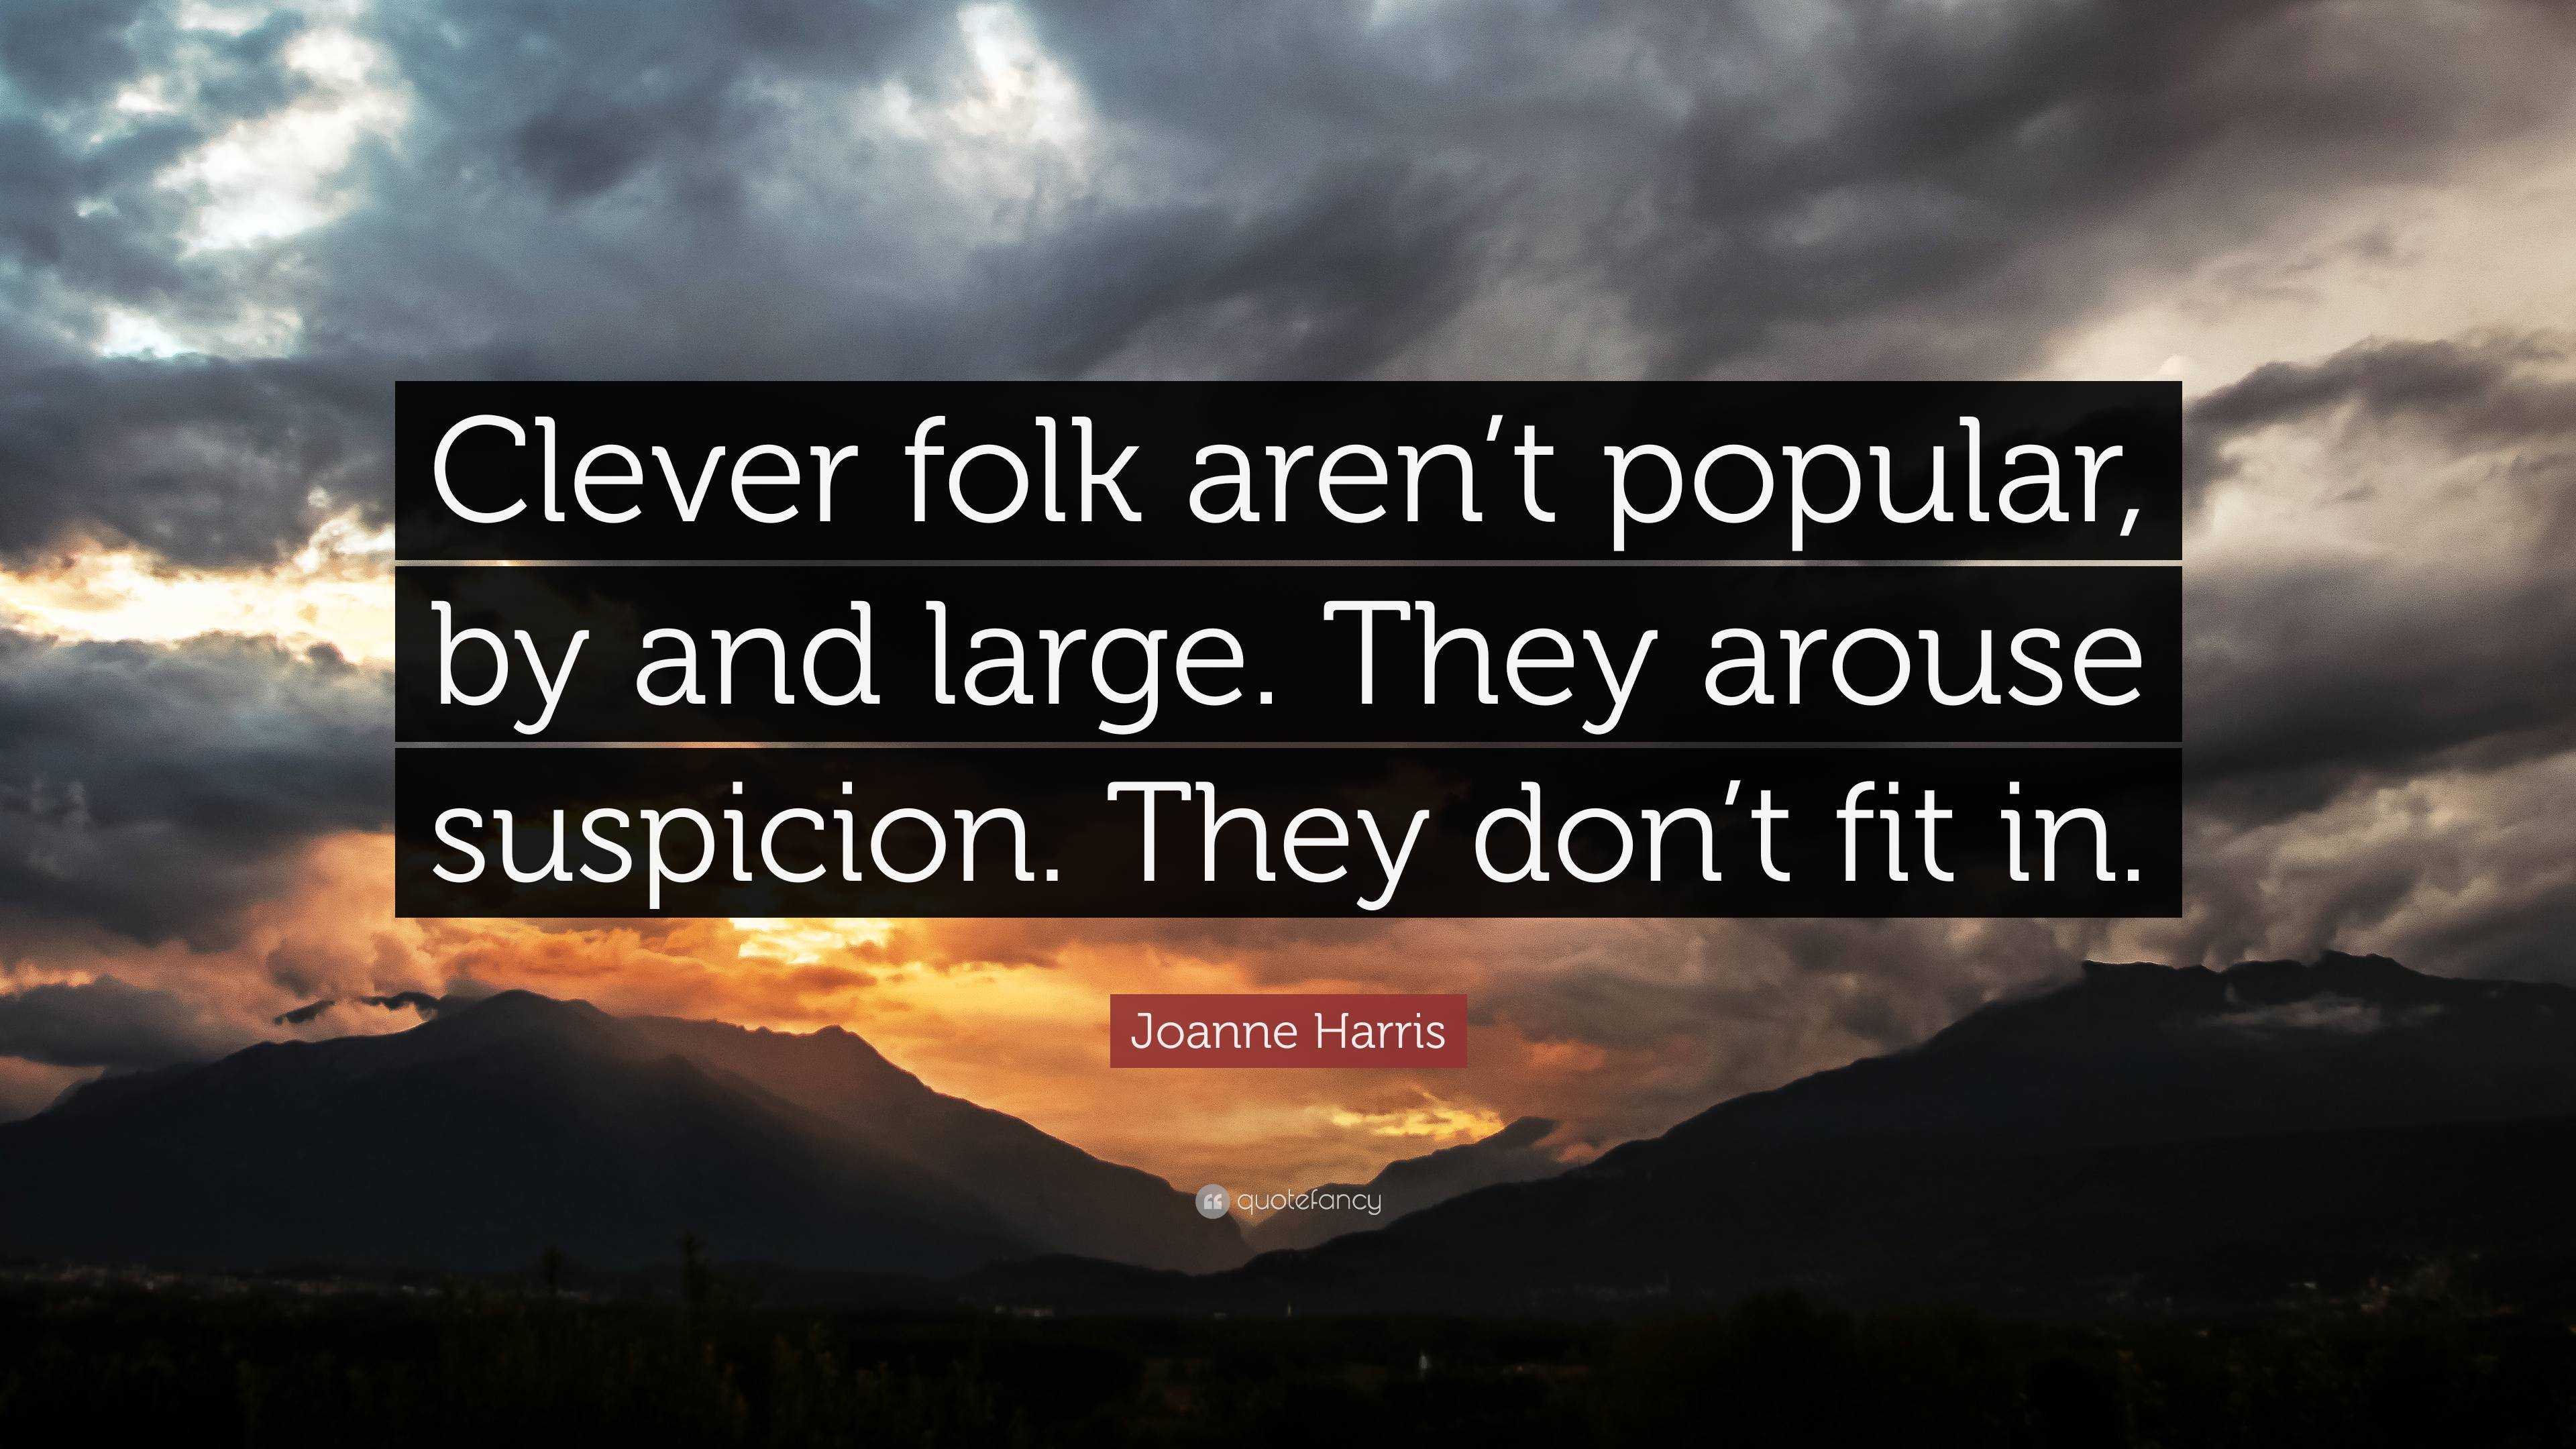 Joanne Harris Quote: “Clever folk aren’t popular, by and large. They ...